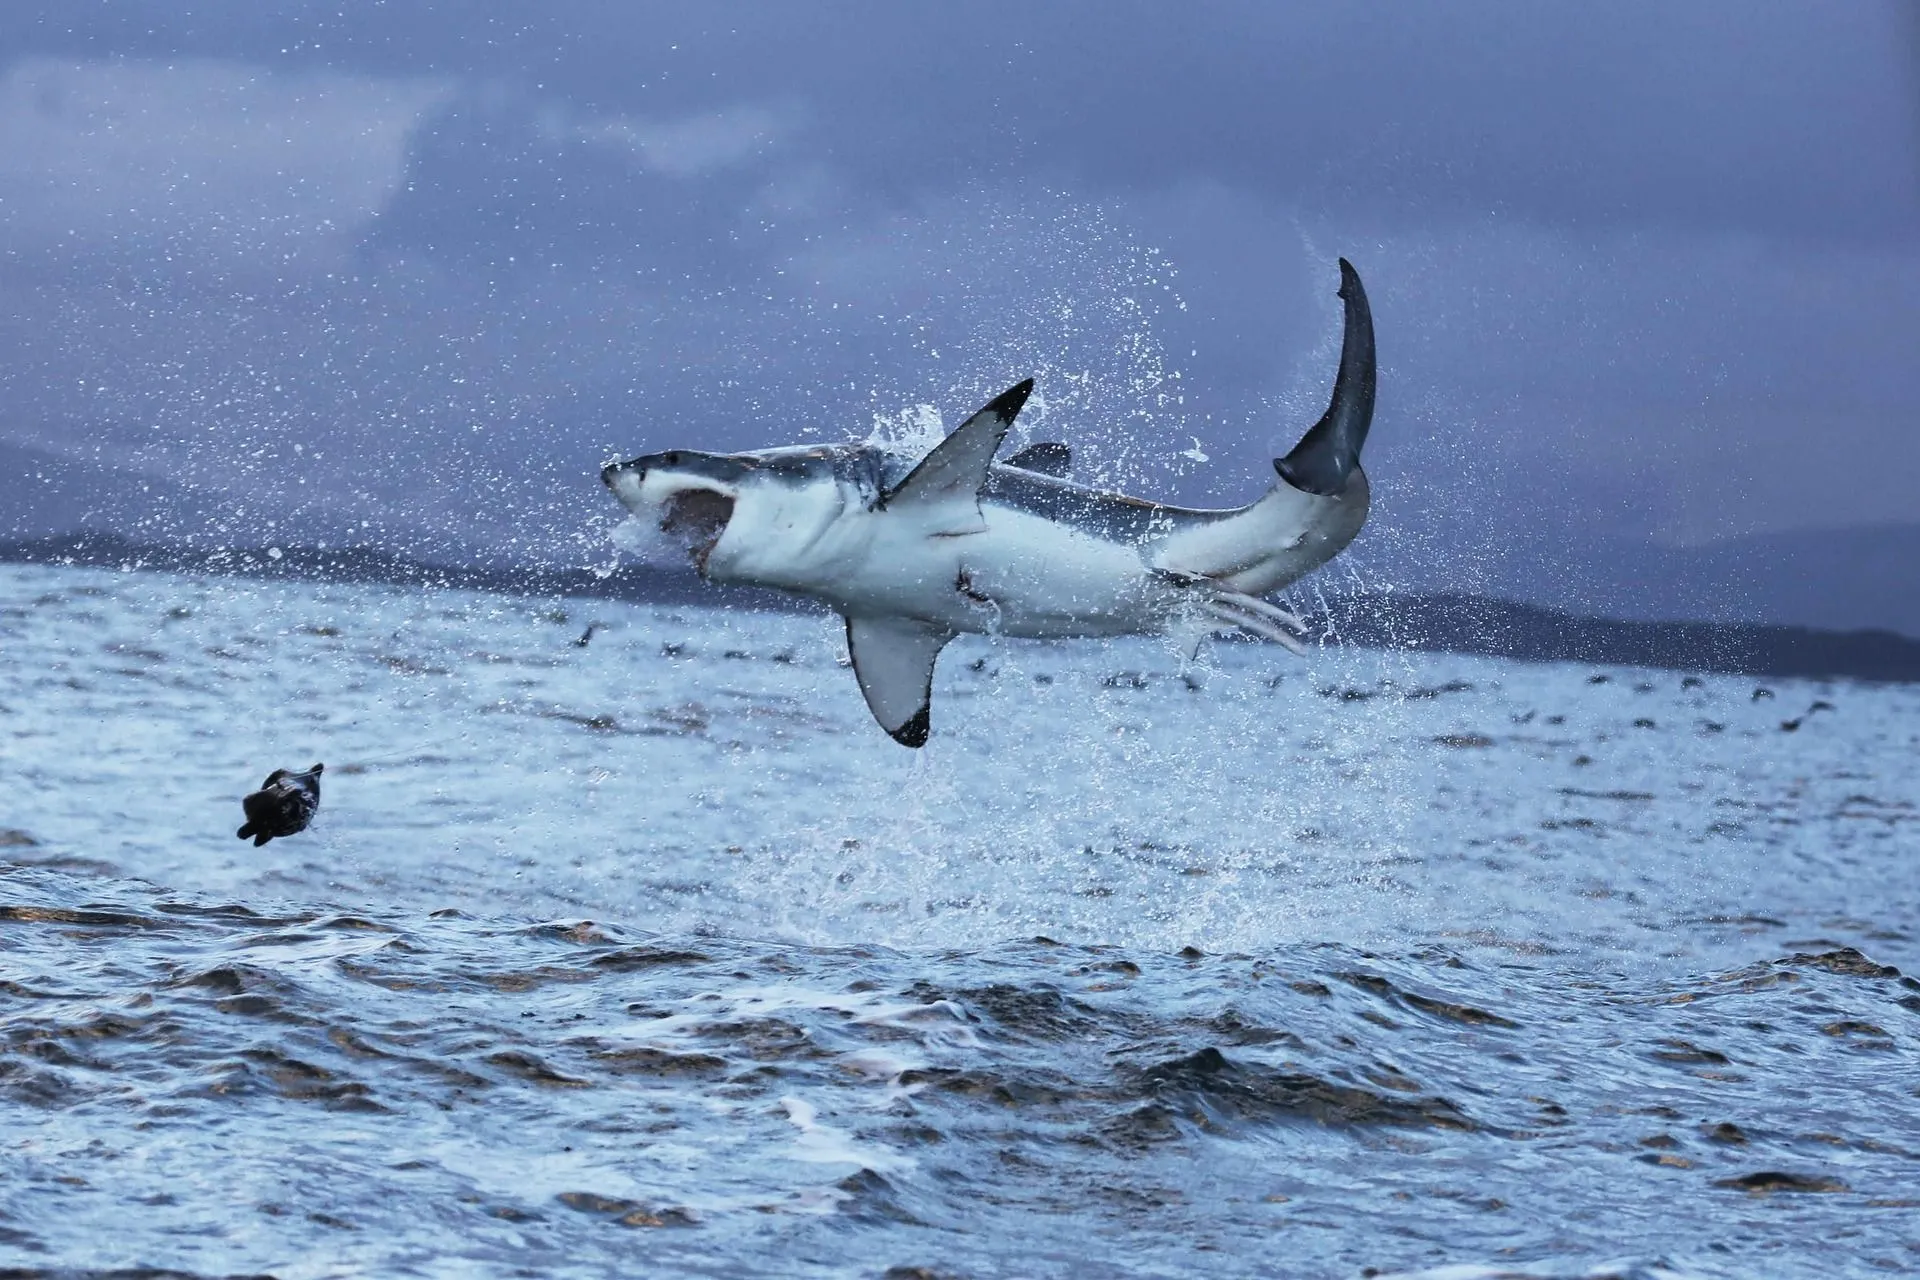 Great white sharks can attack their prey and launch them up to 10 ft (3m) into the air.